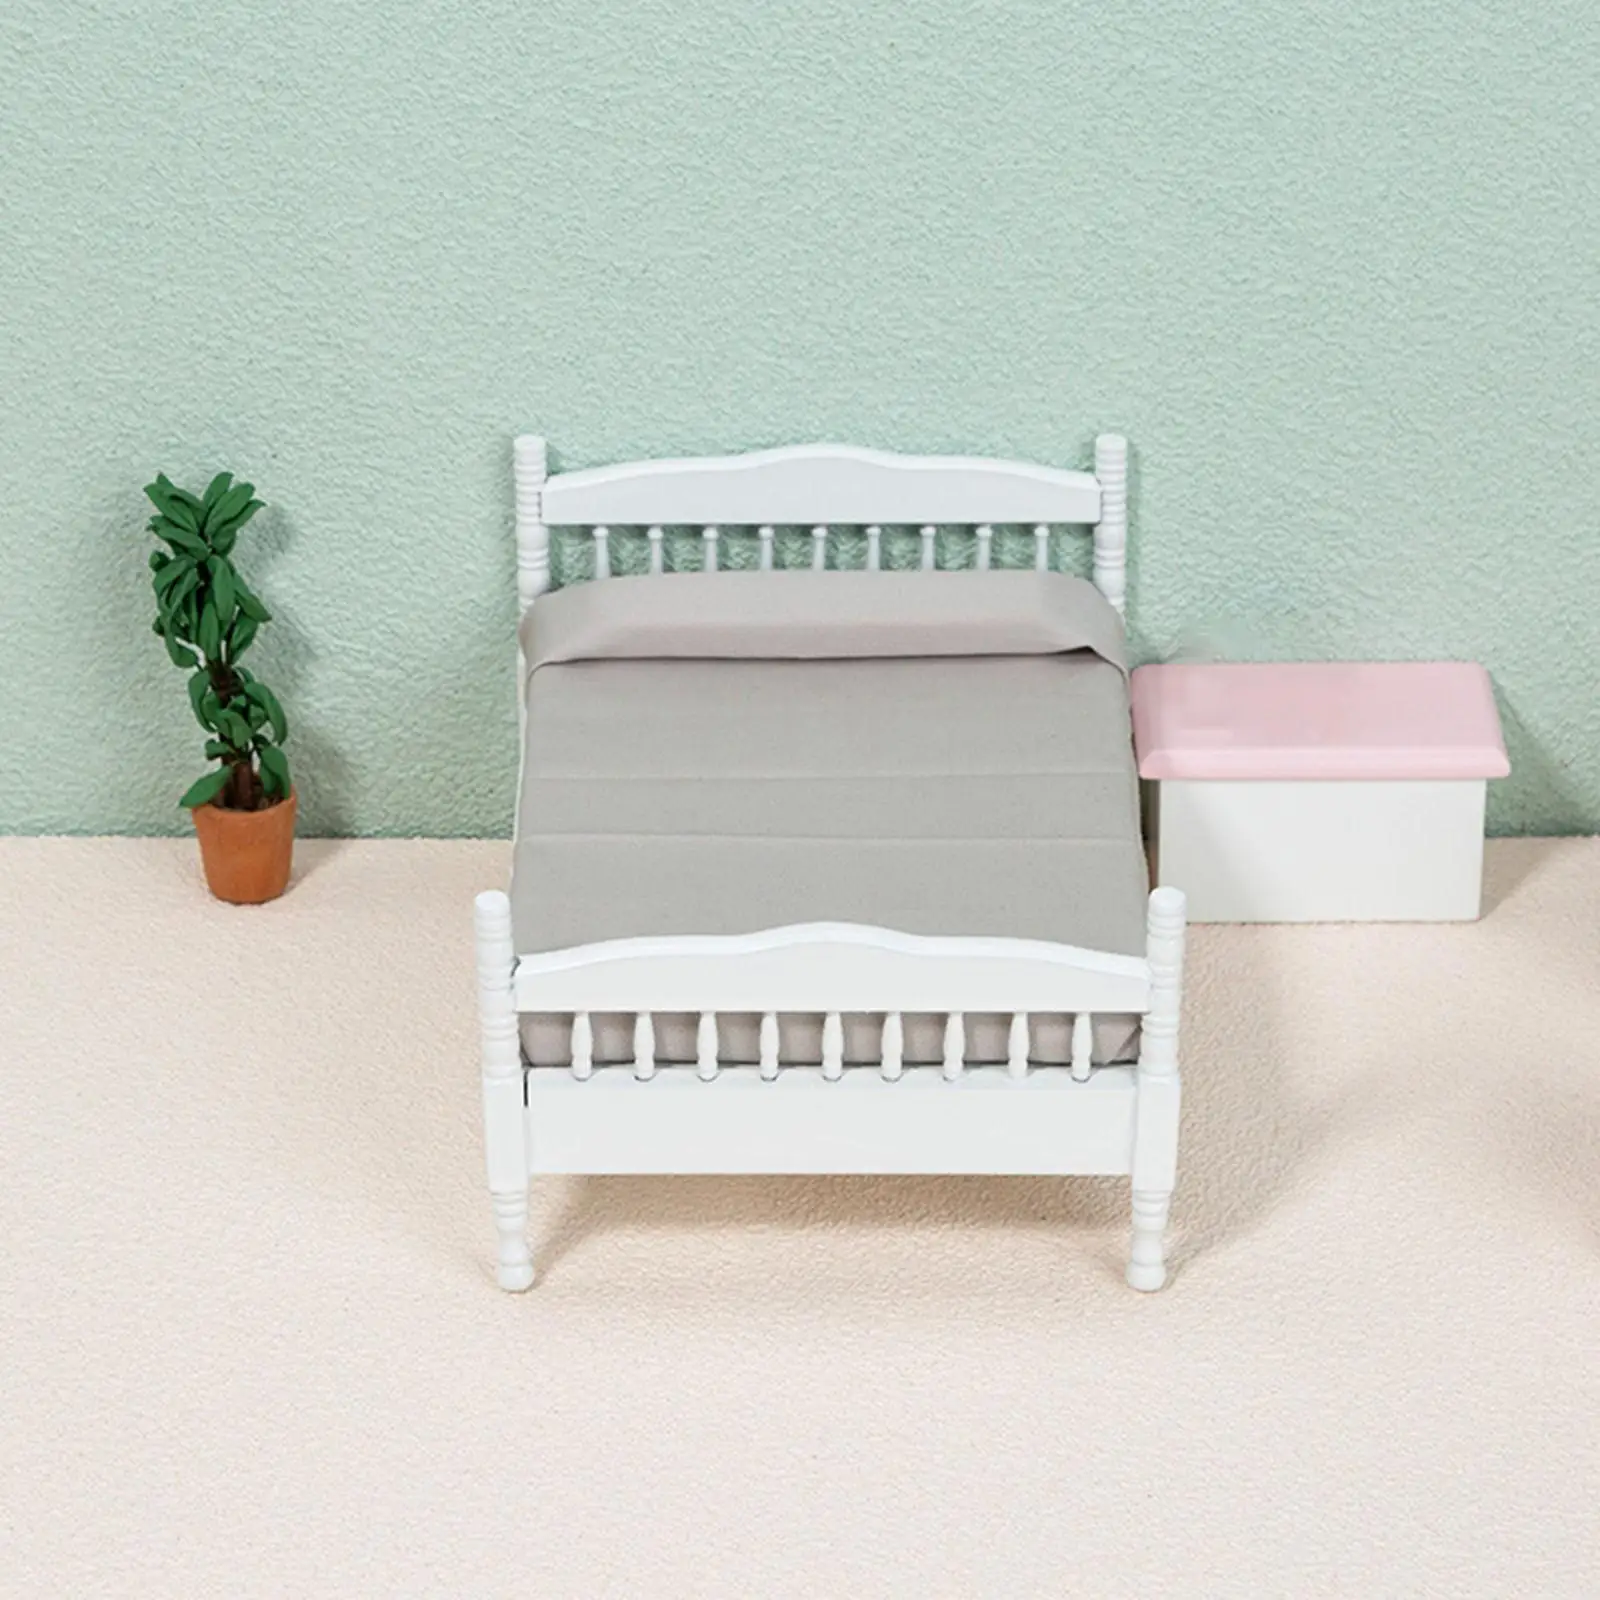 Dollhouse Mini Bed Doll House Furnishings Dollation Accessories Double Bed for Doll House Lover